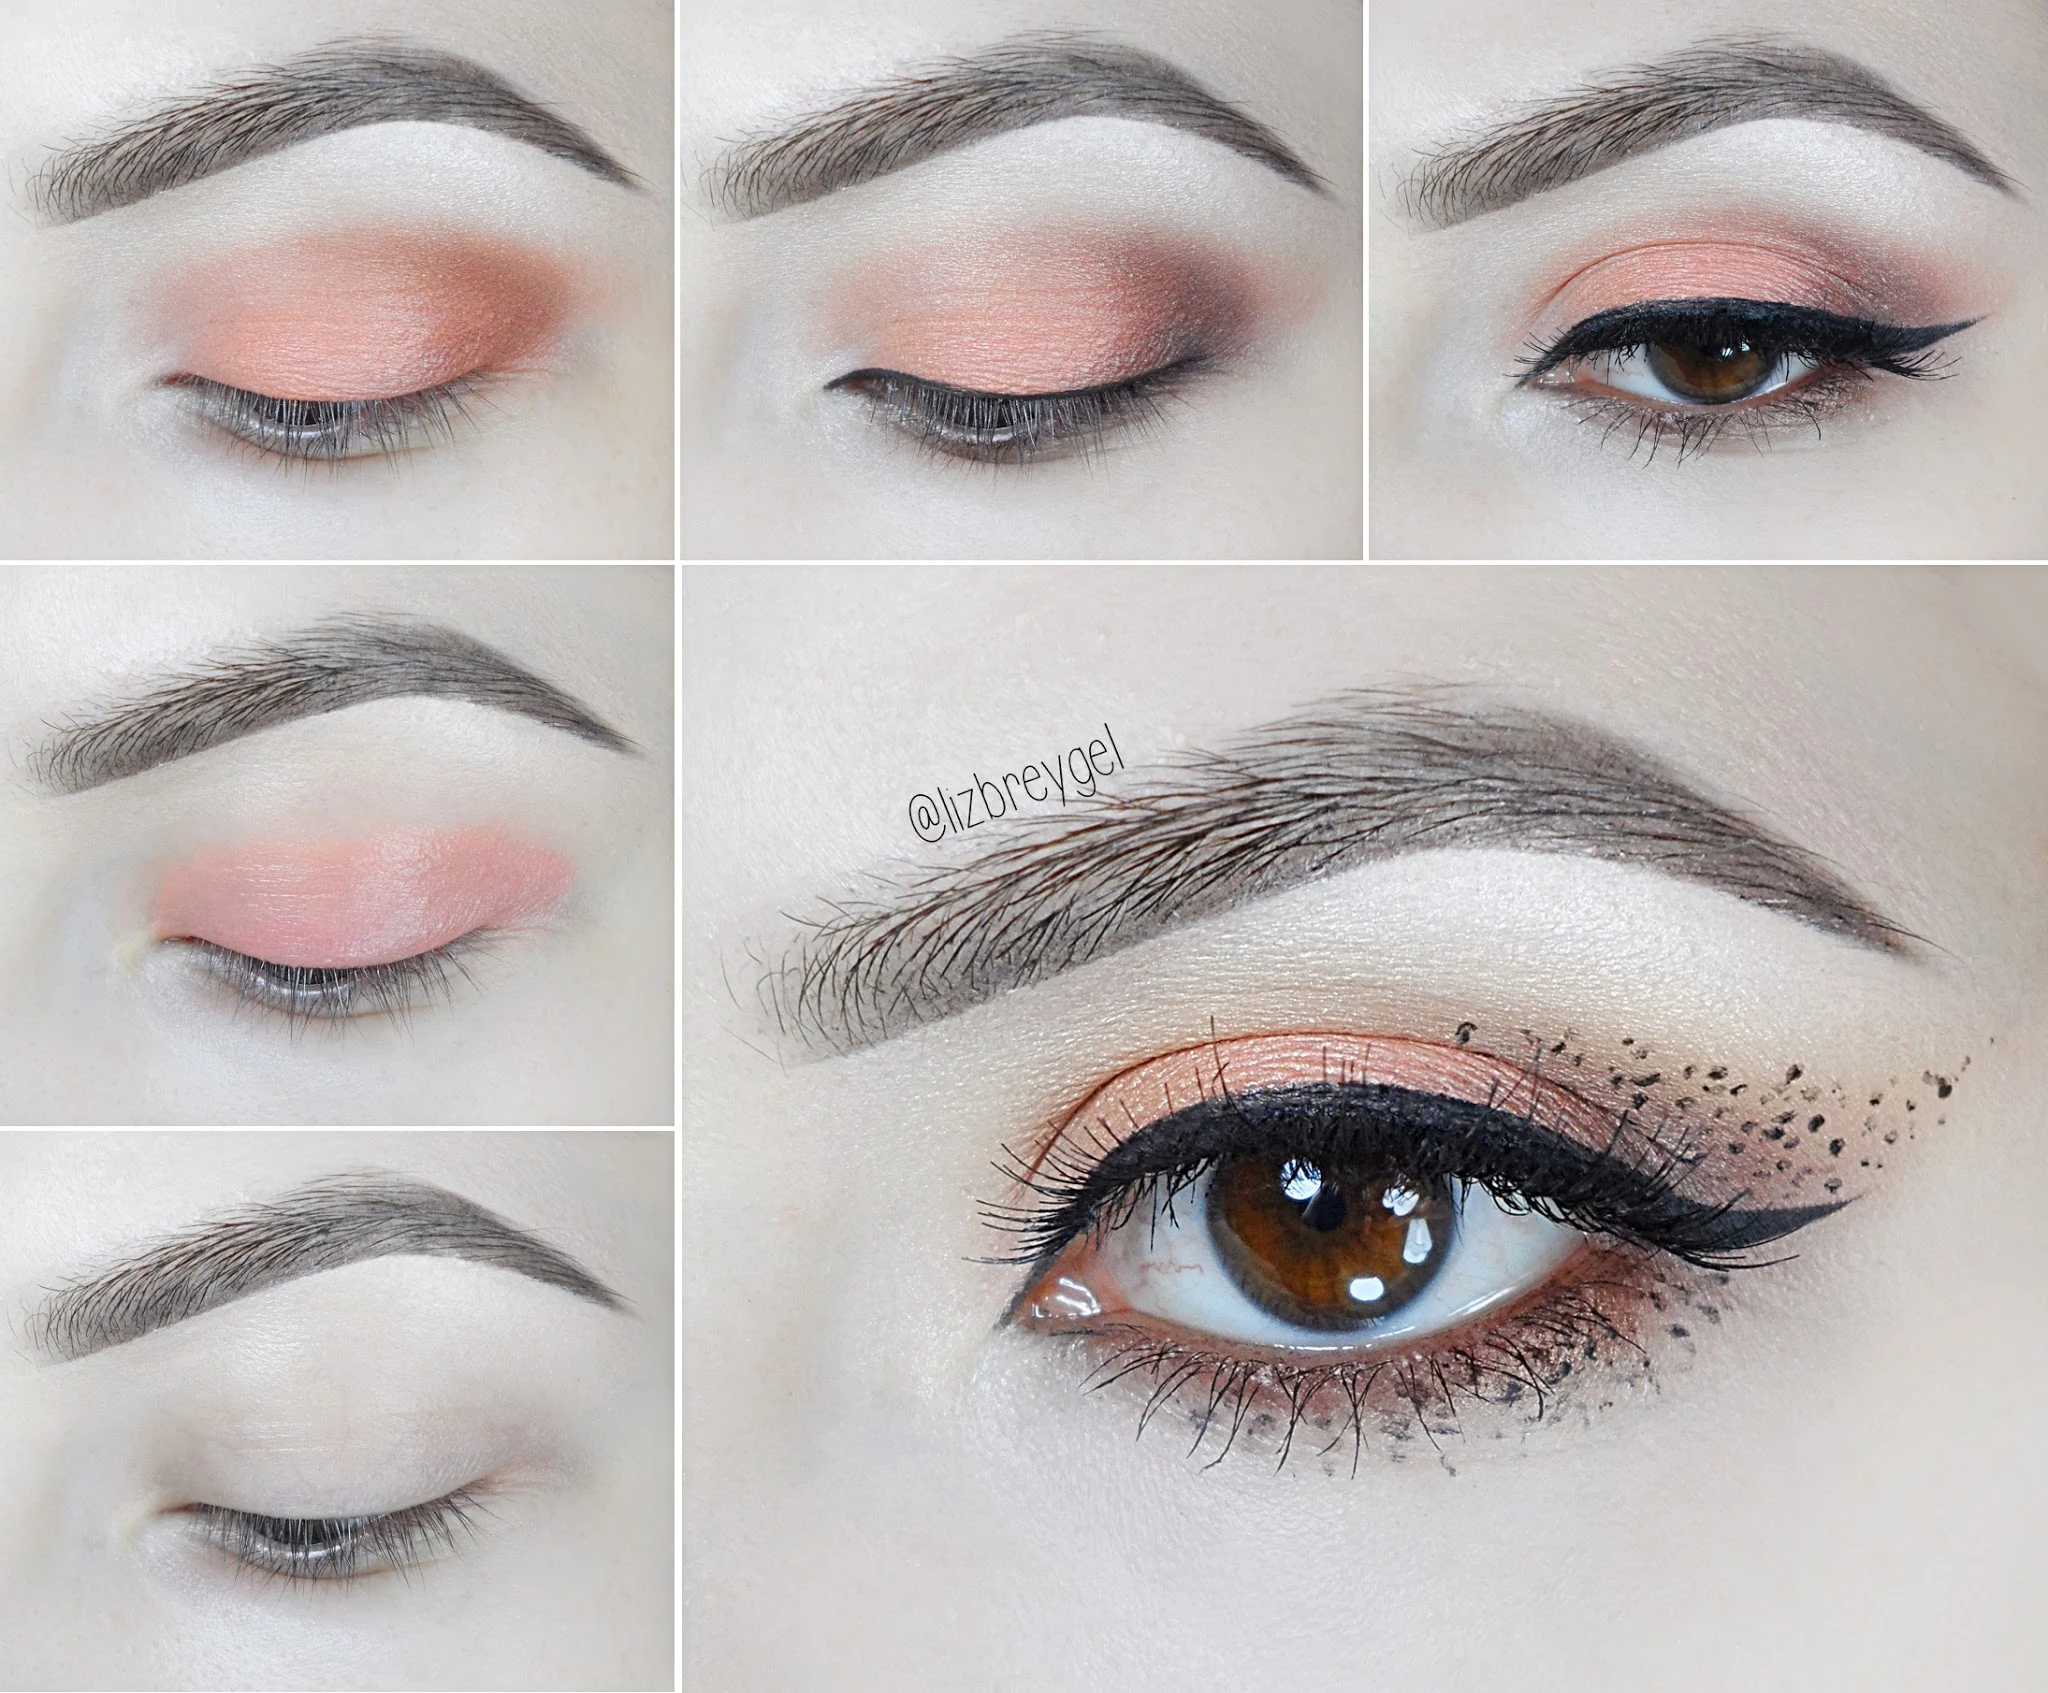 step-by-step makeup pictorial on how to do an orange and brown eye look for fall inspired by pumpkin